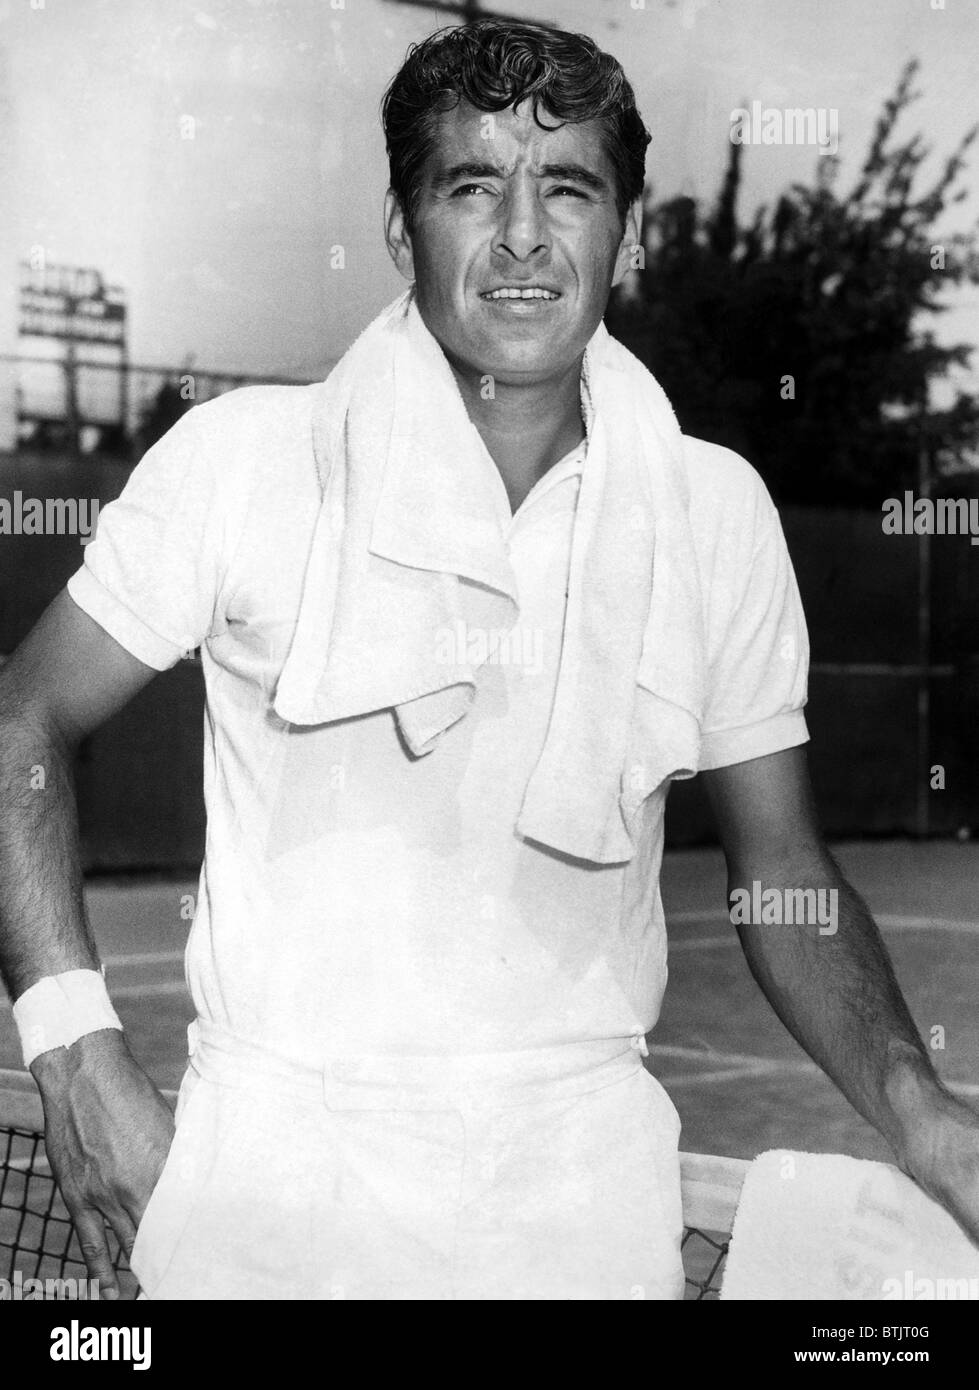 Tennis player Pancho Gonzales ca. 1962. Courtesy: CSU Archives/Everett Collection. Stock Photo